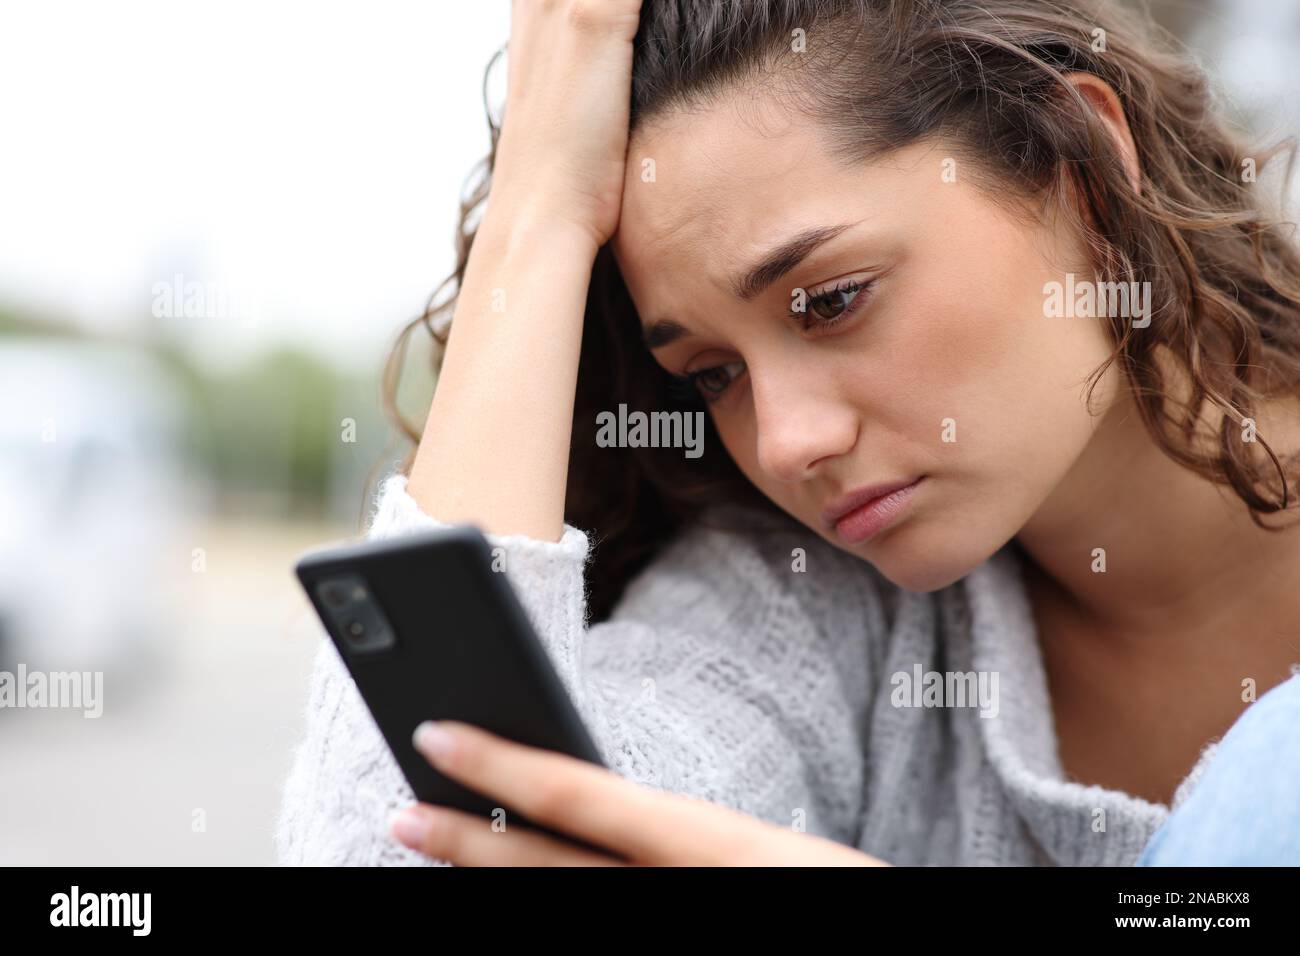 Sad woman checking phone message complaining in the street Stock Photo